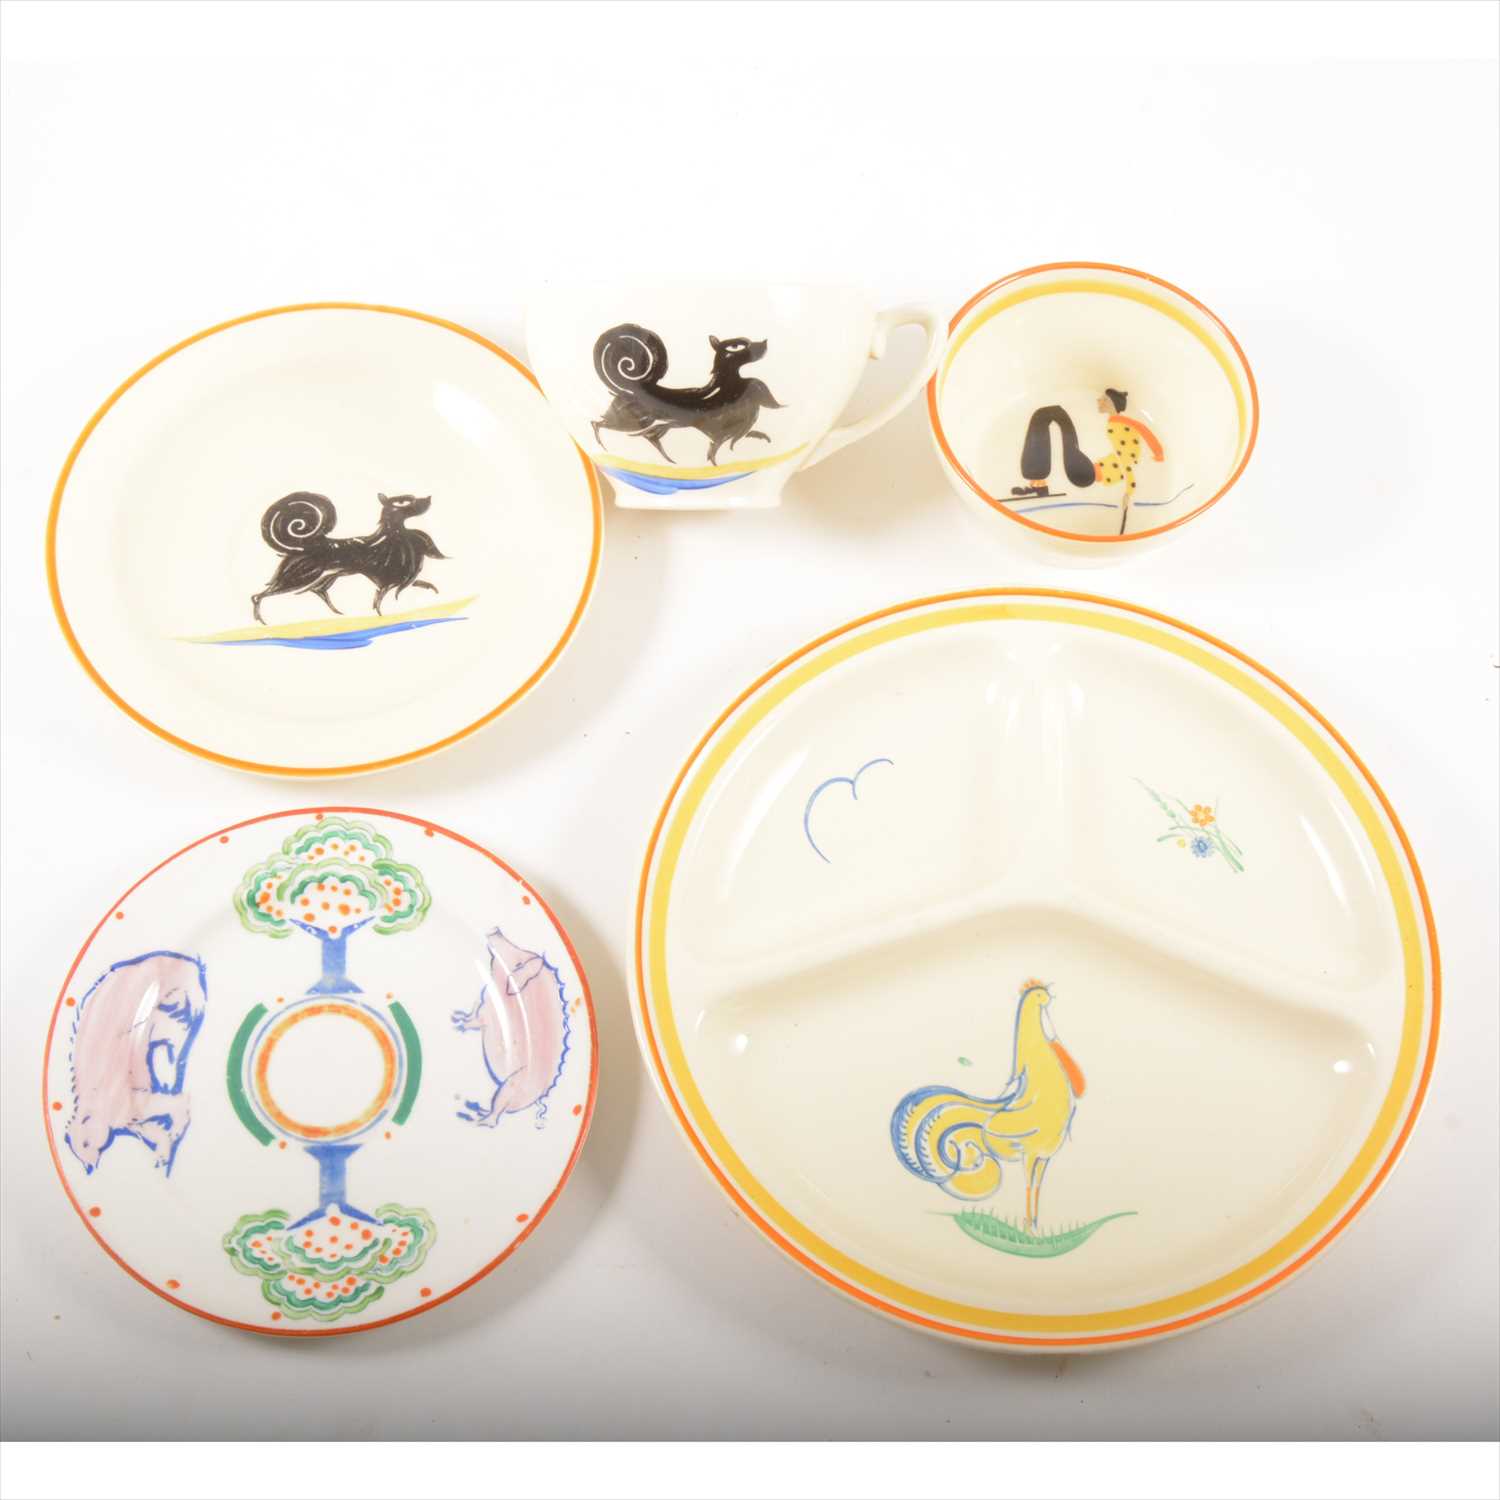 Lot 160 - A collection of Nursery Ware by Susie Cooper, circa 1930